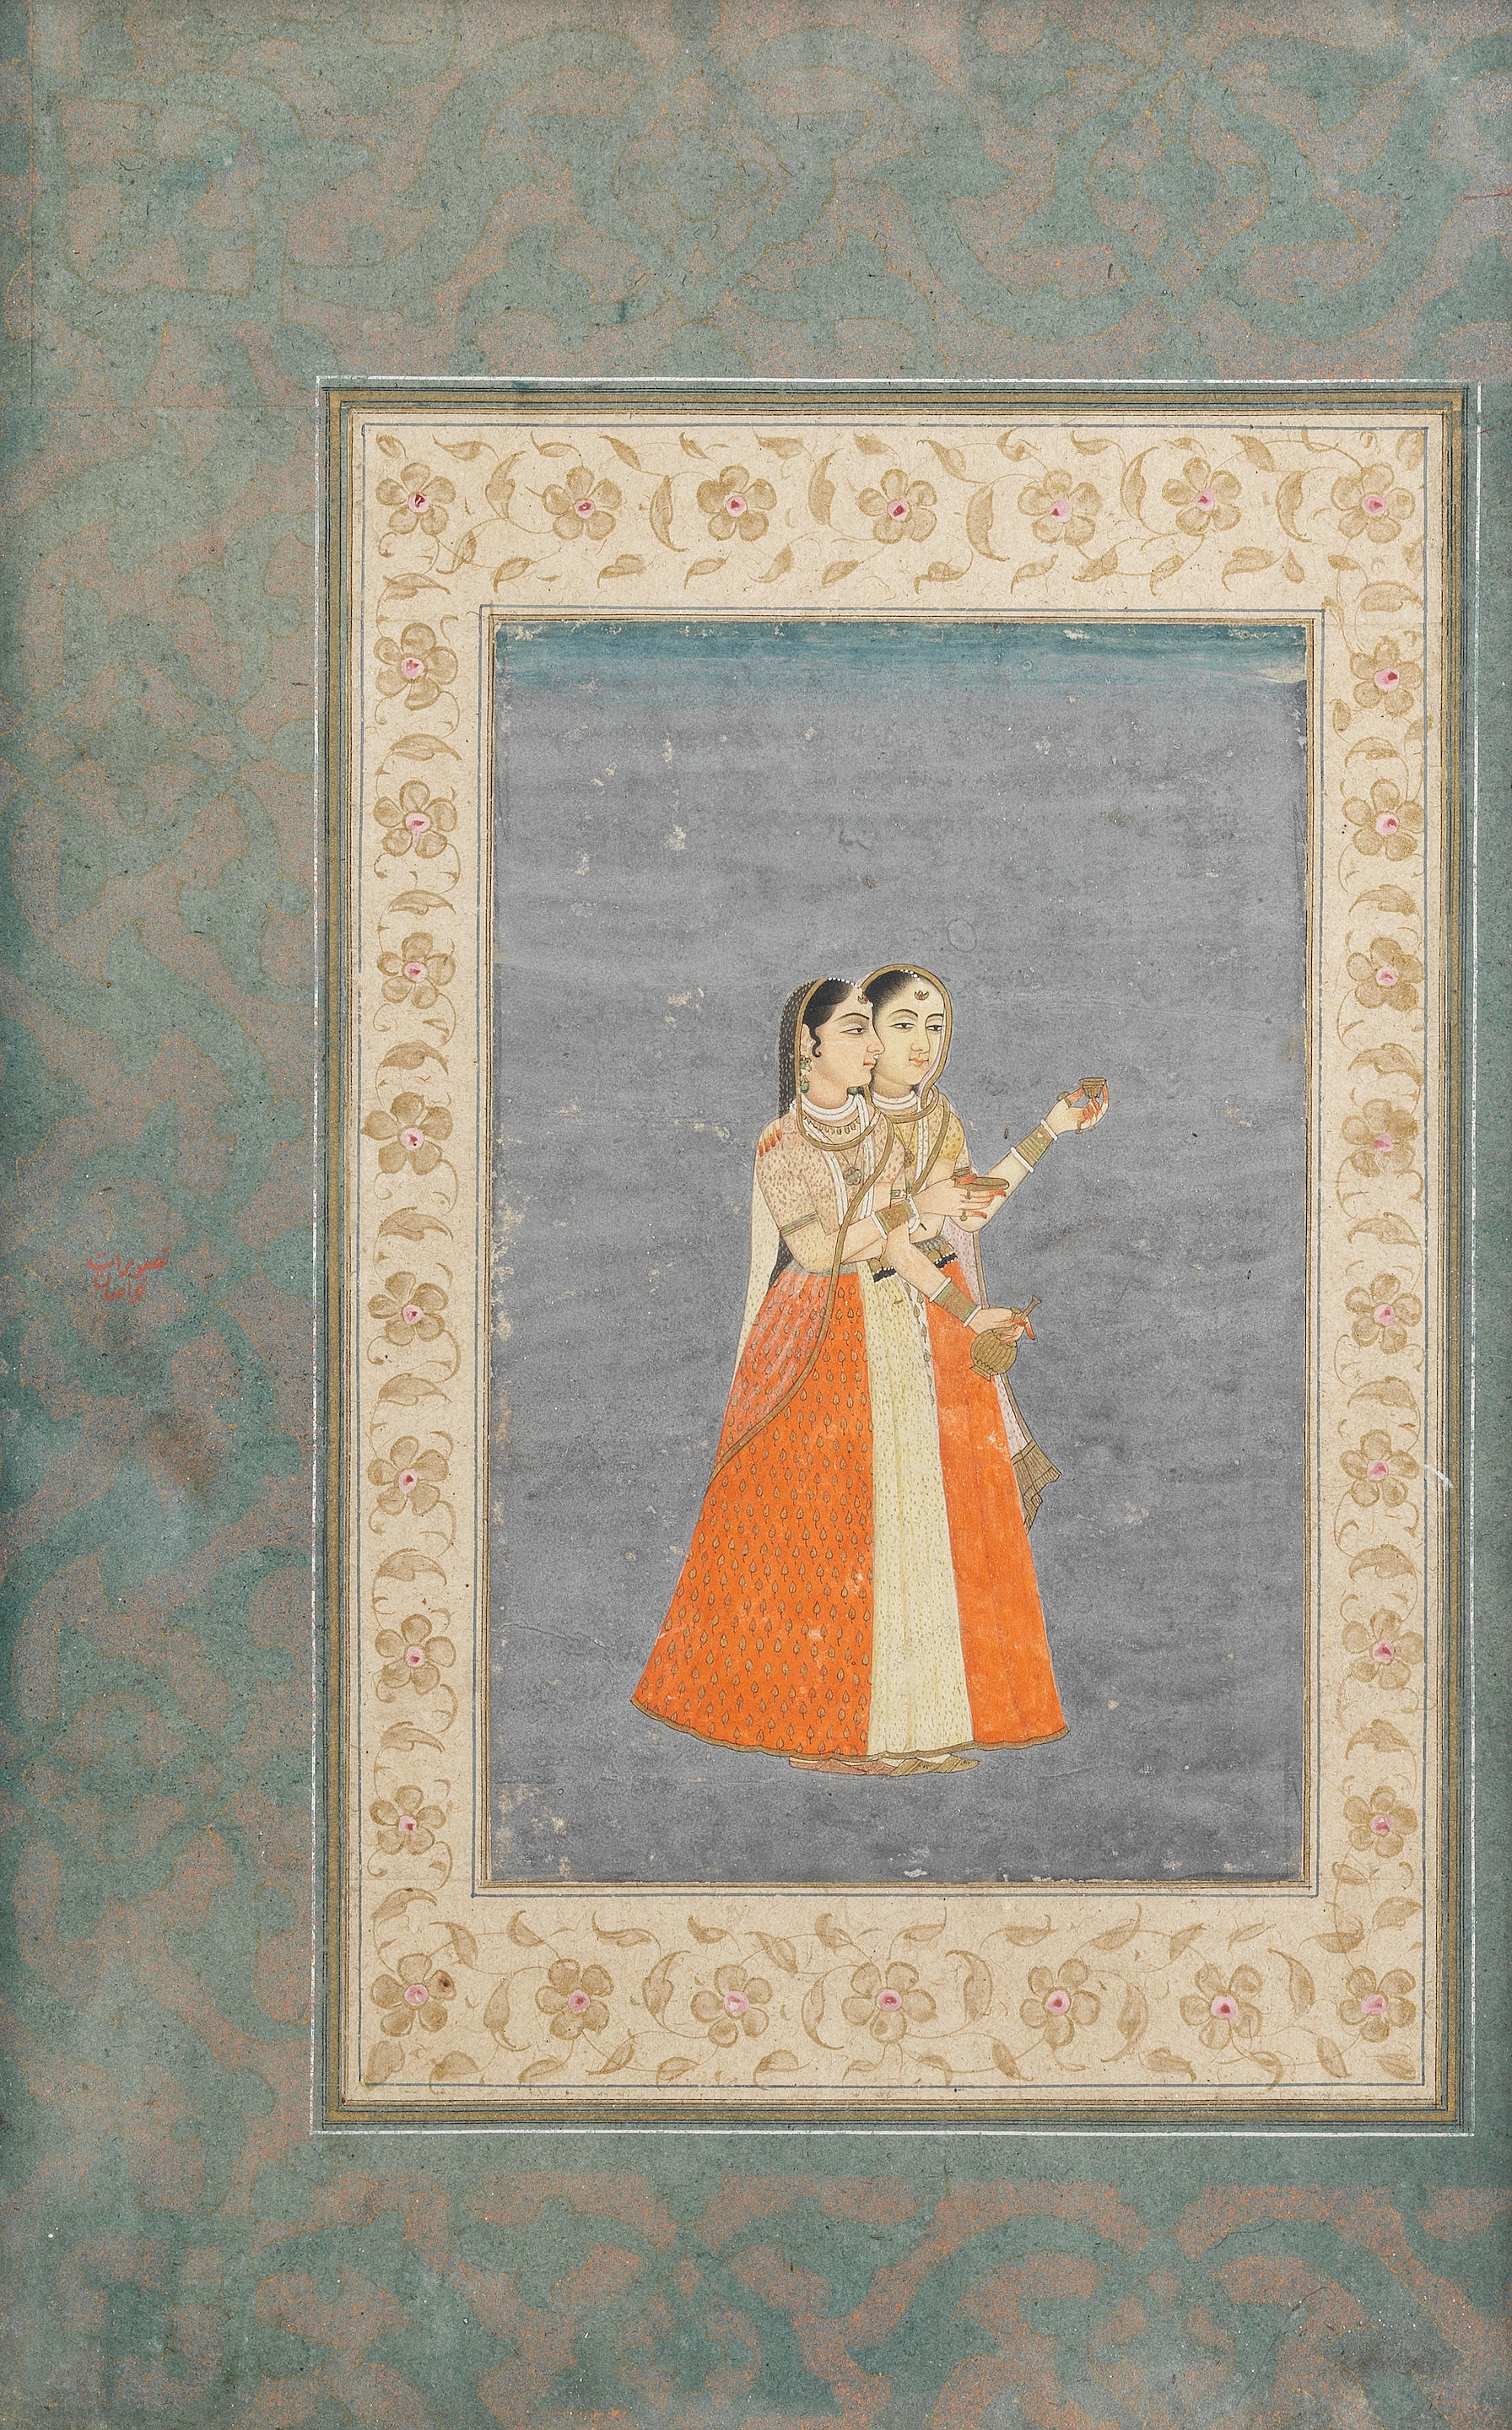 Two women, perhaps courtesans, holding wine cups and a flask